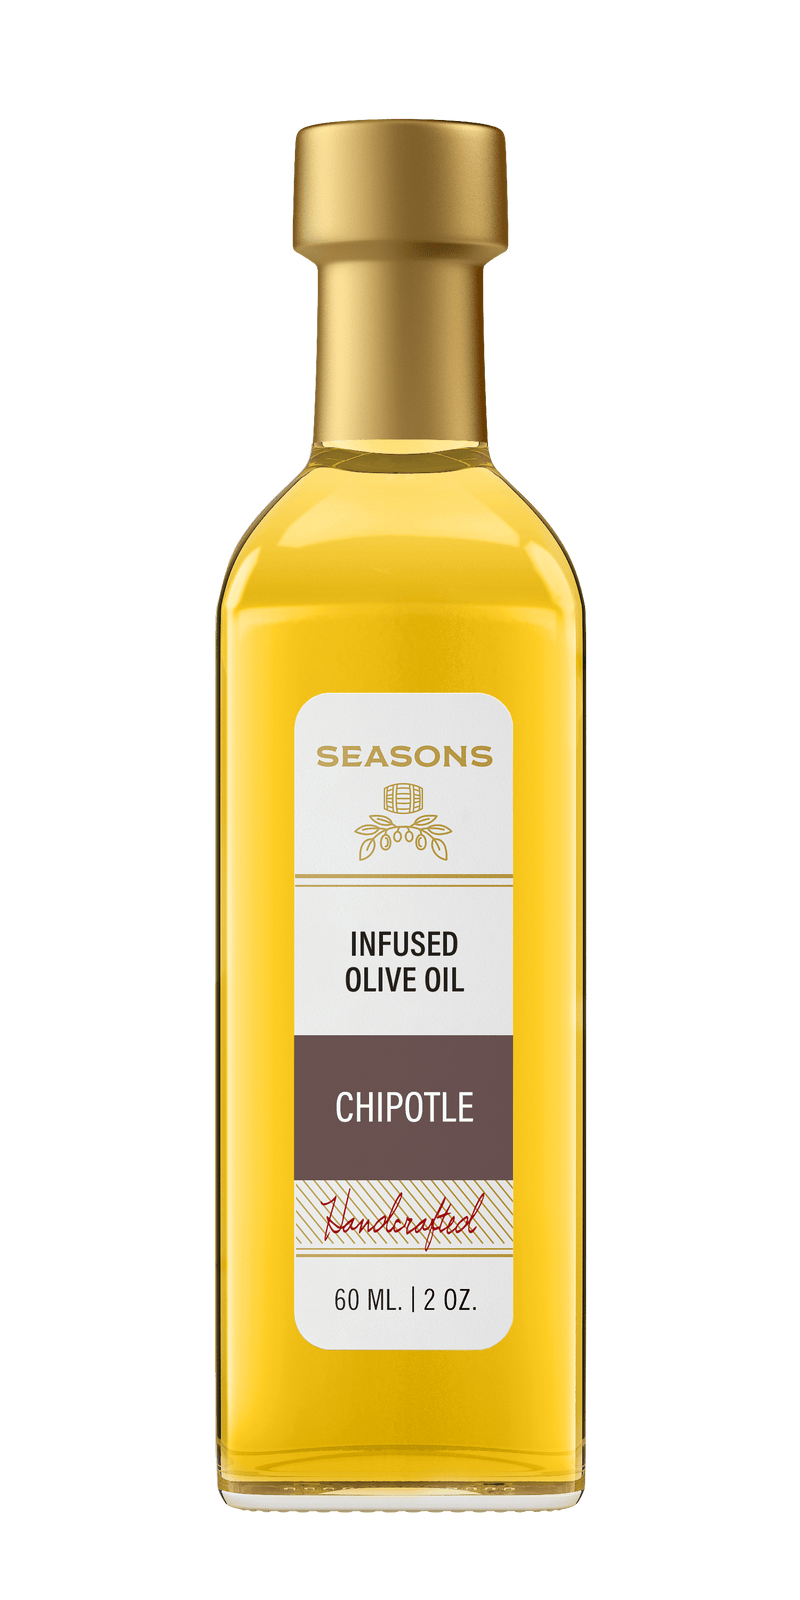 Millpress Imports Infused Olive Oil 60mL Chipotle Infused Olive Oil